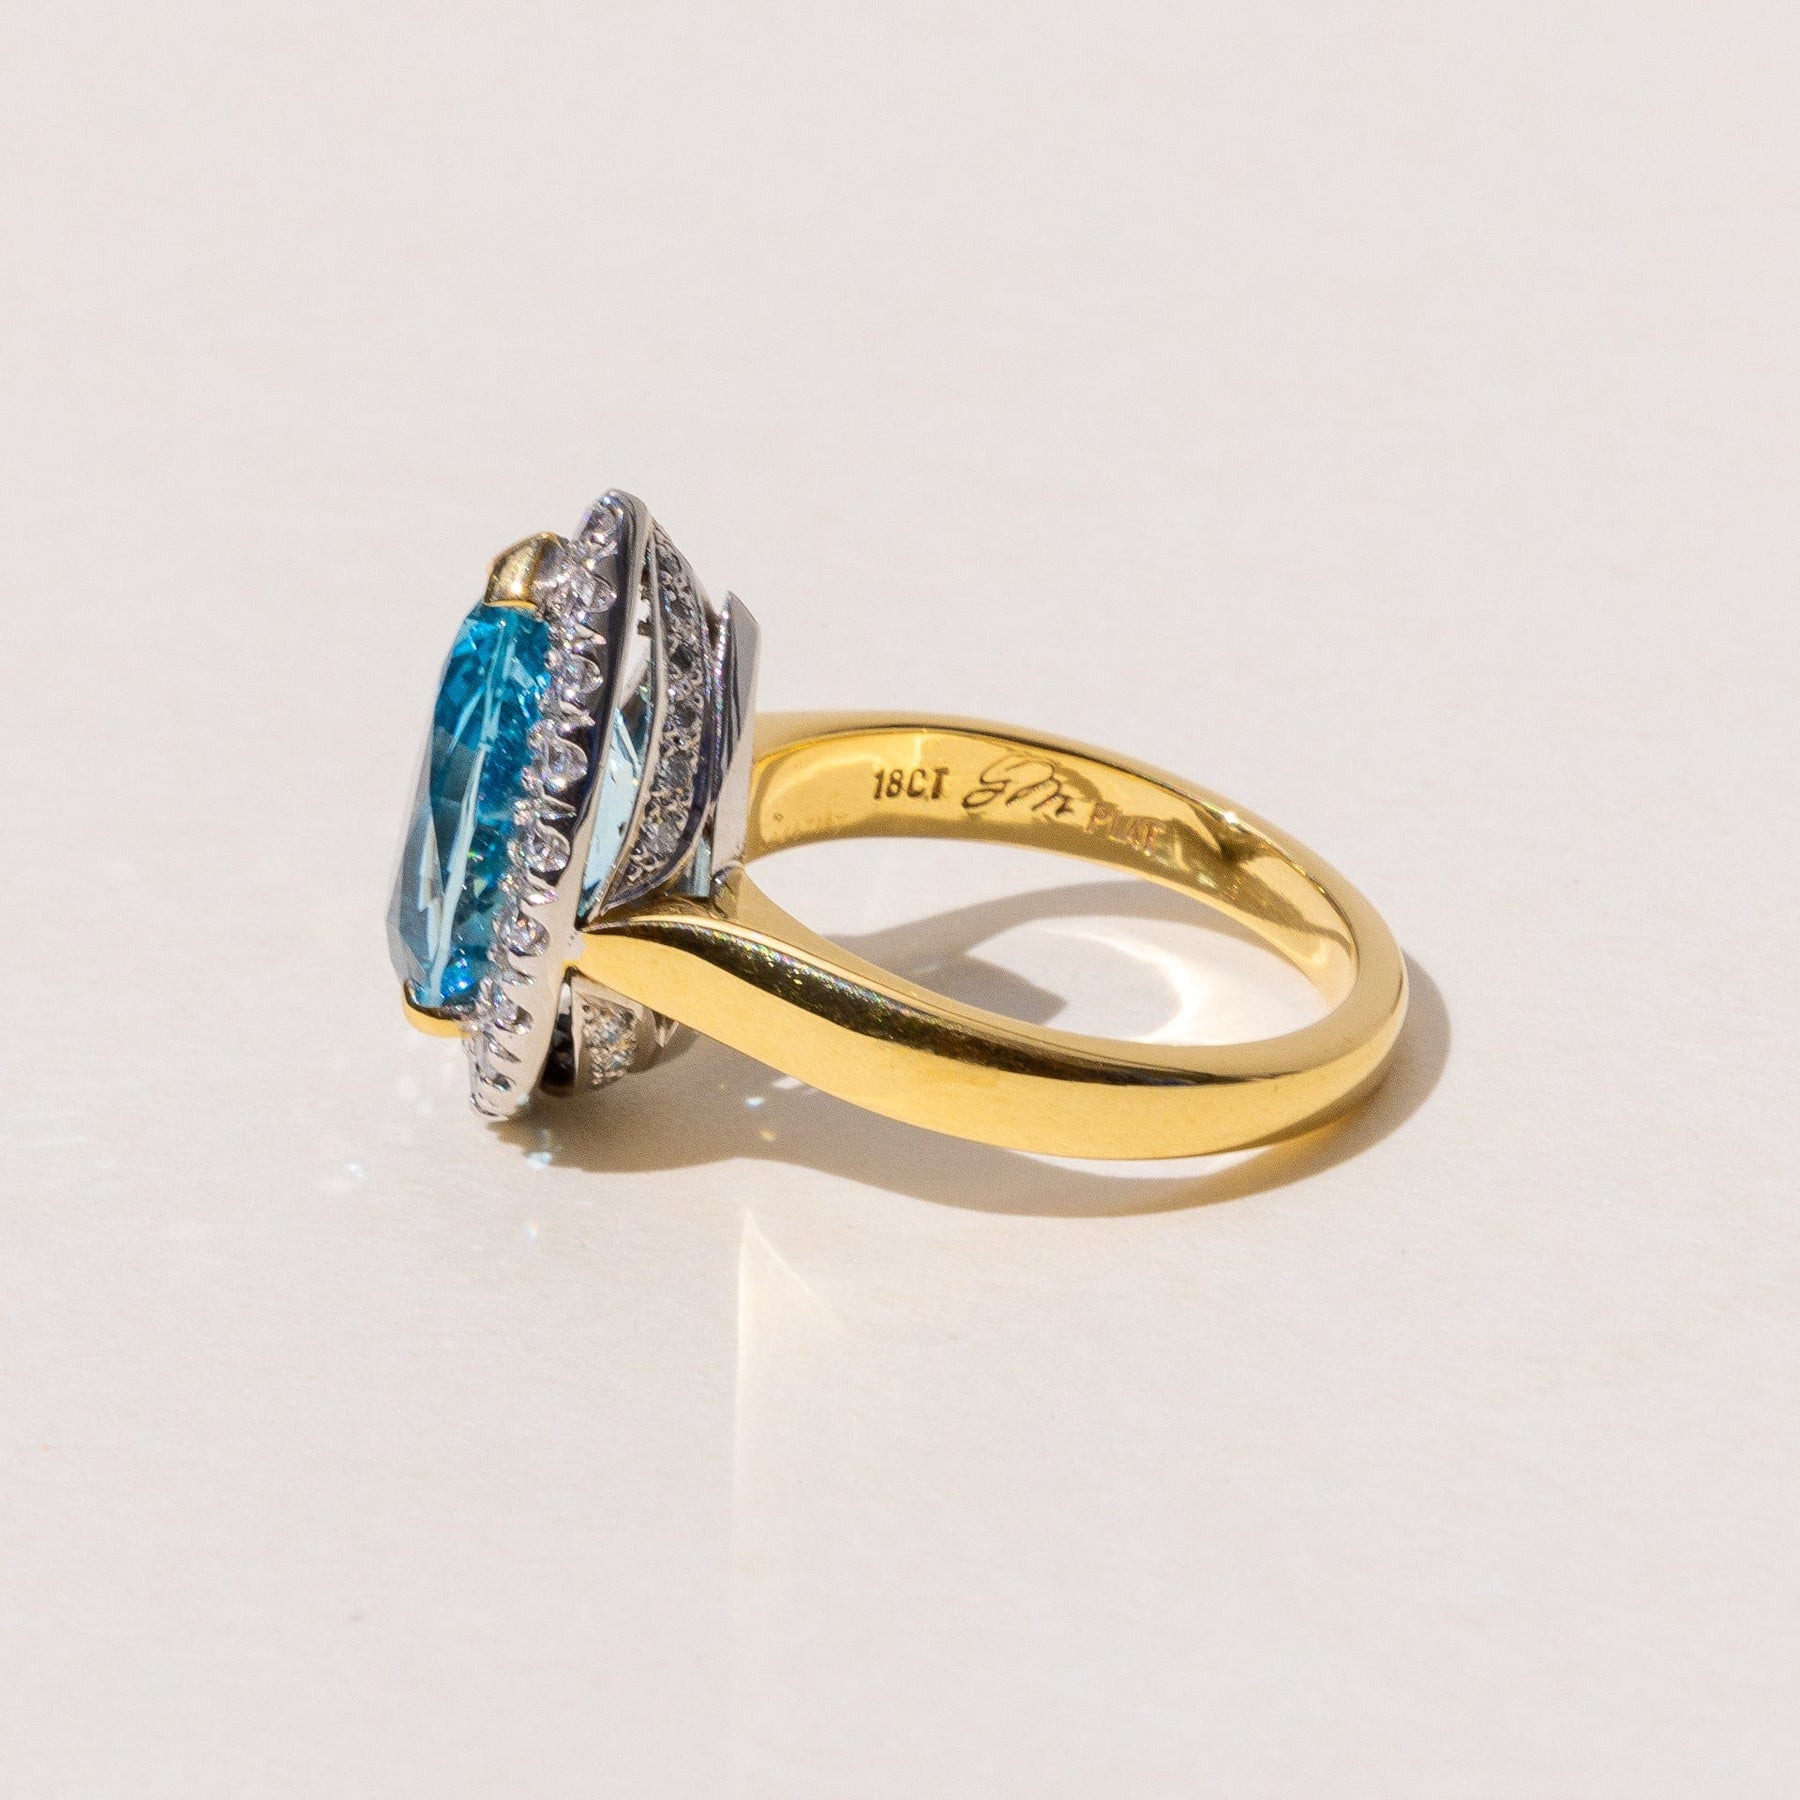 Made to Order  Large Aquamarine Cocktail Ring in 18ct Yellow Gold by our Master Jeweller